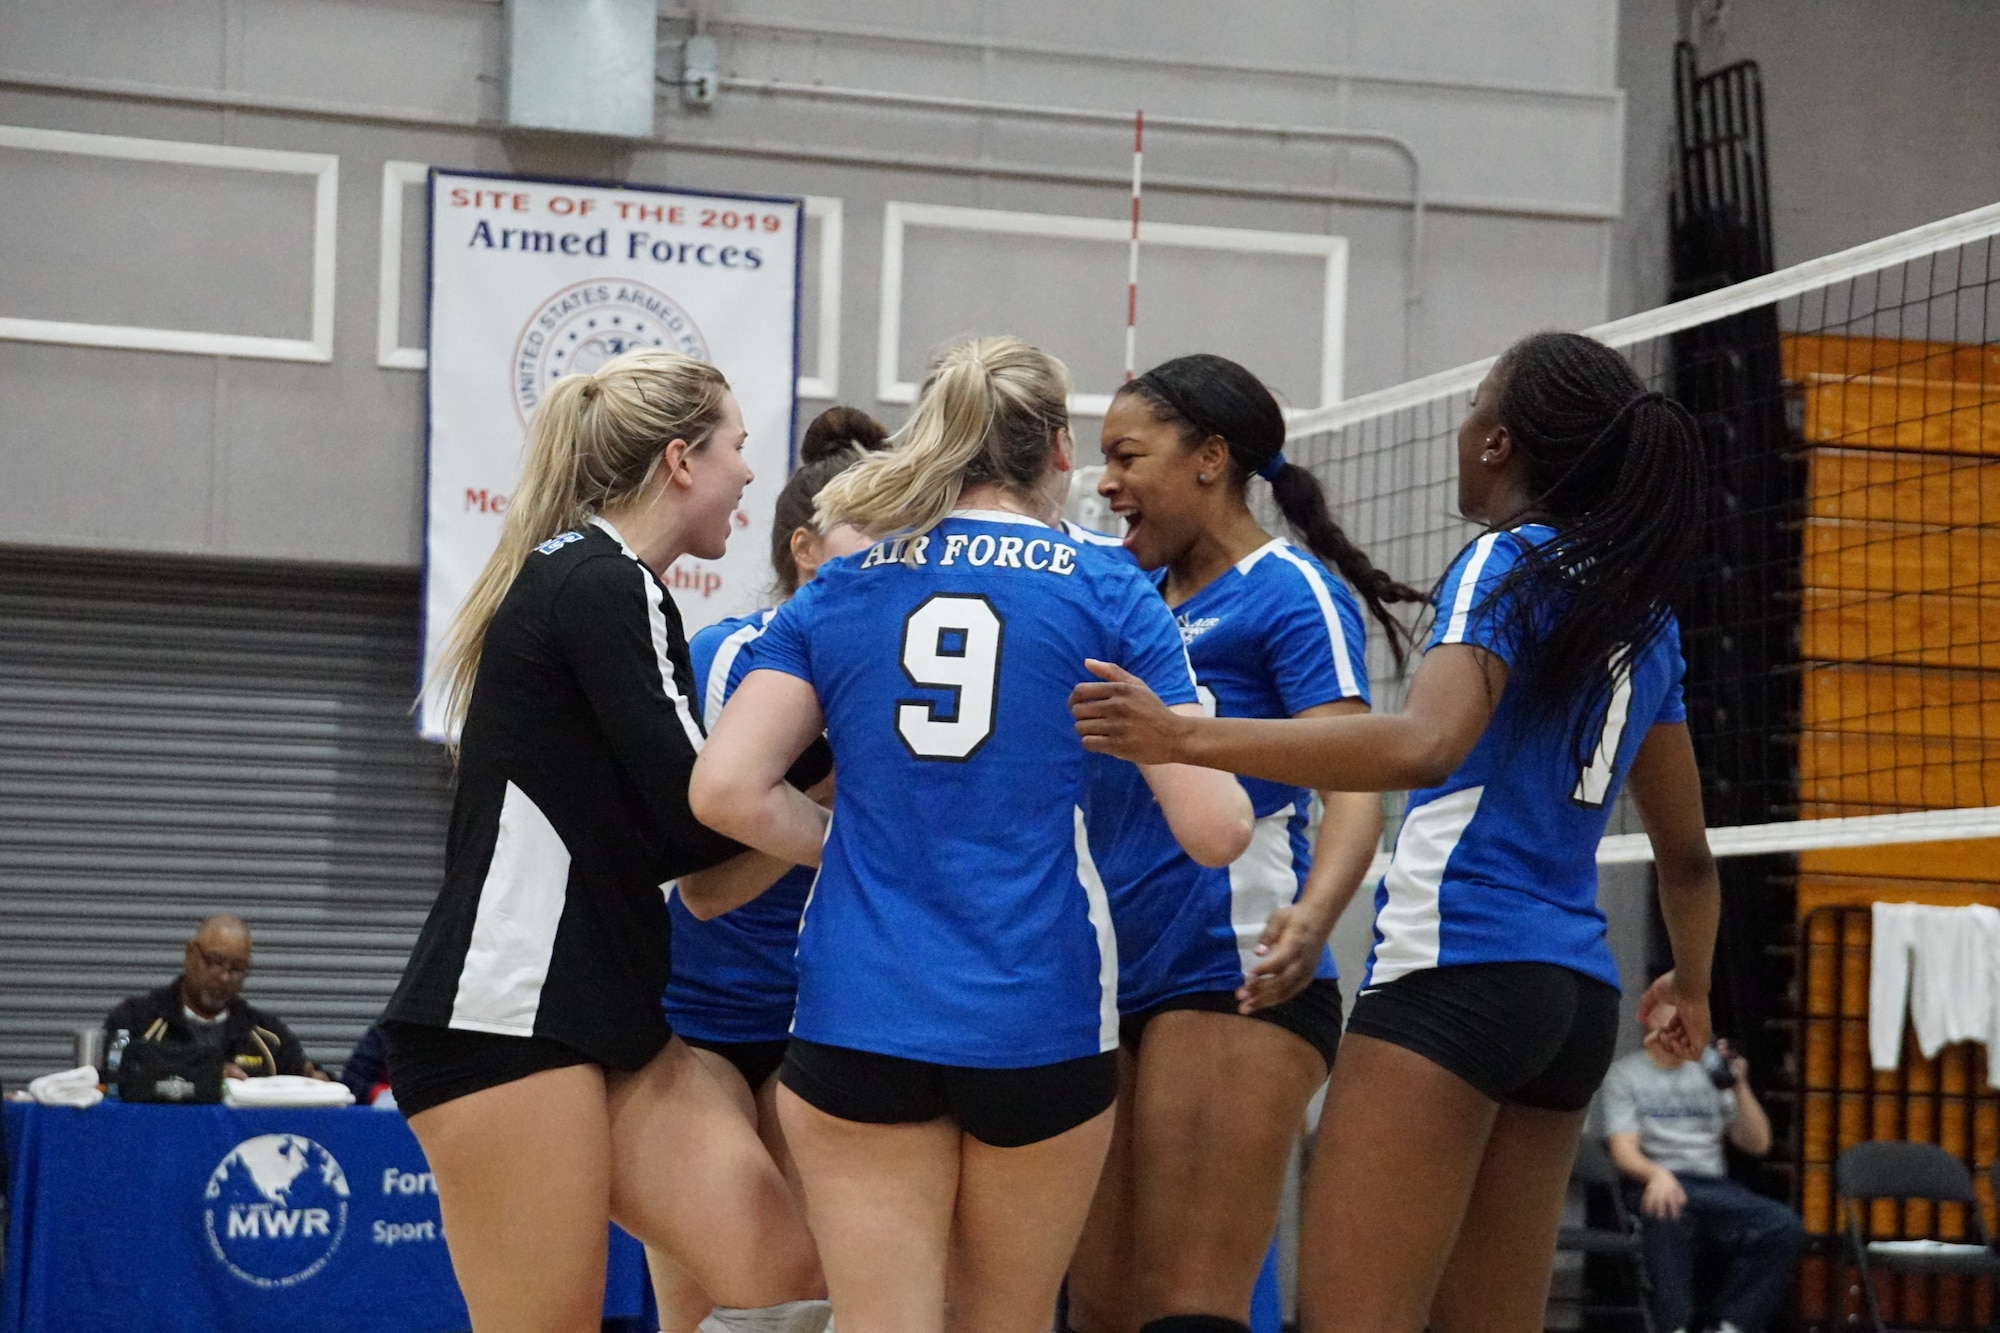 Senior Airman Jade Cairns (second from right), 60th Diagnostics and Therapeutics Squadron medical laboratory technician, celebrates with her teammates during the 2019 Armed Forces Volleyball Championship at Fort Bragg, North Carolina, Mar. 8, 2019. Army, Navy (with Coast Guard) and Air Force teams squared off at the annual AFVC through three days of round-robin competition, to eventually crown the best men and women volleyball players in the military. (U.S. Navy photo by Mass Communications Specialist 1st Class John Benson)